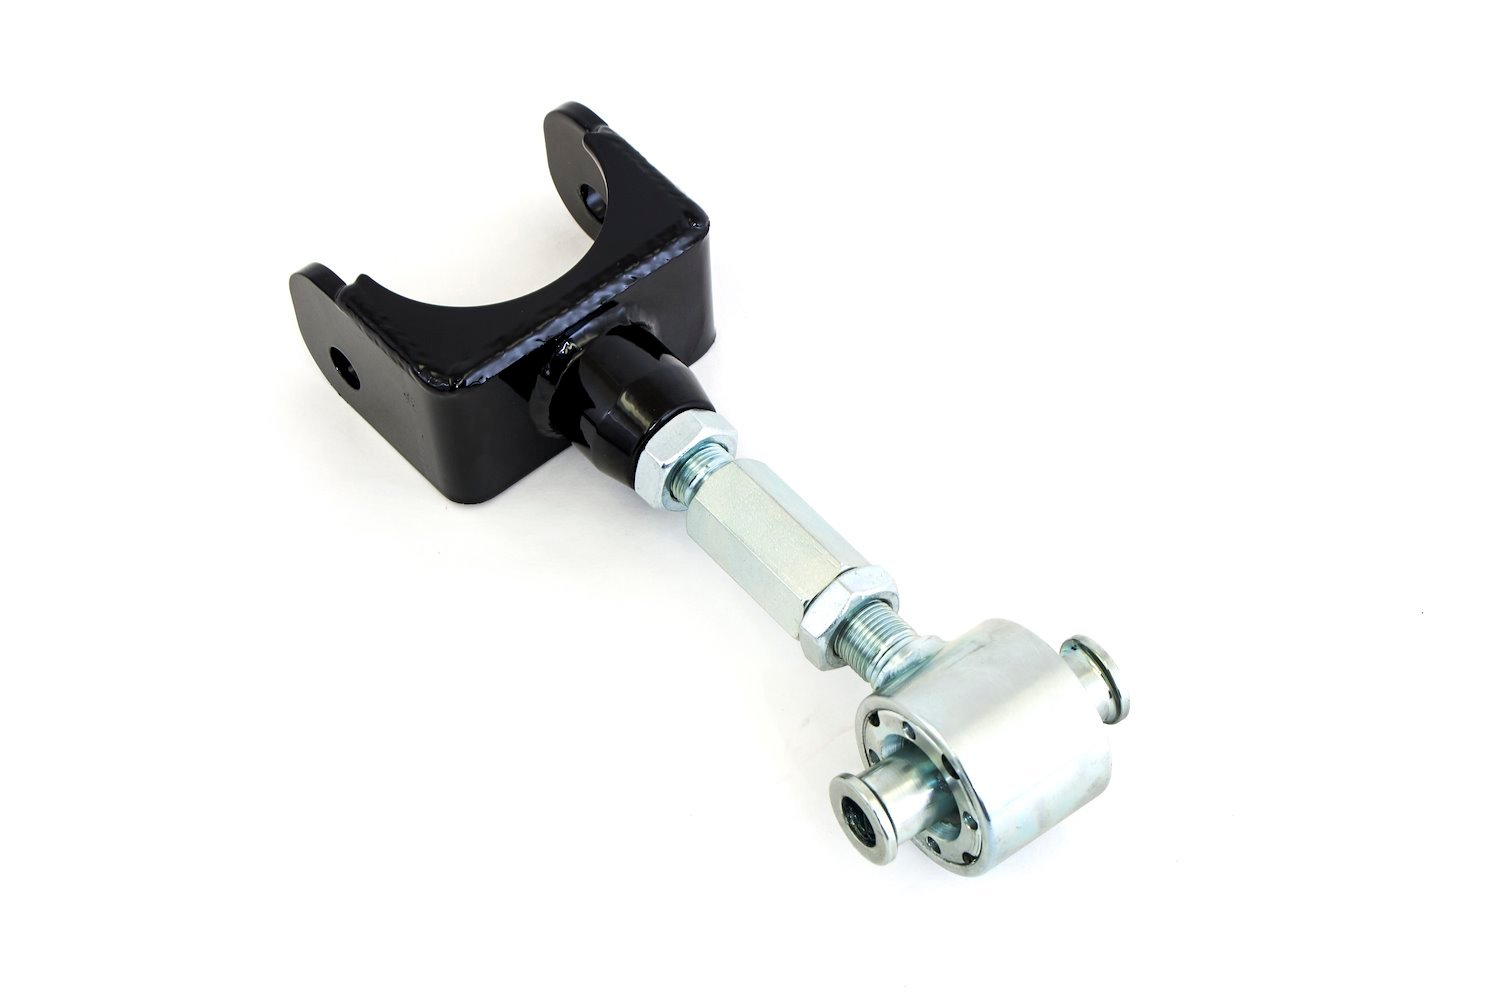 UMI?s adjustable upper rear control arm for the 2005-2010 Ford Mustang replaces the factory stamped